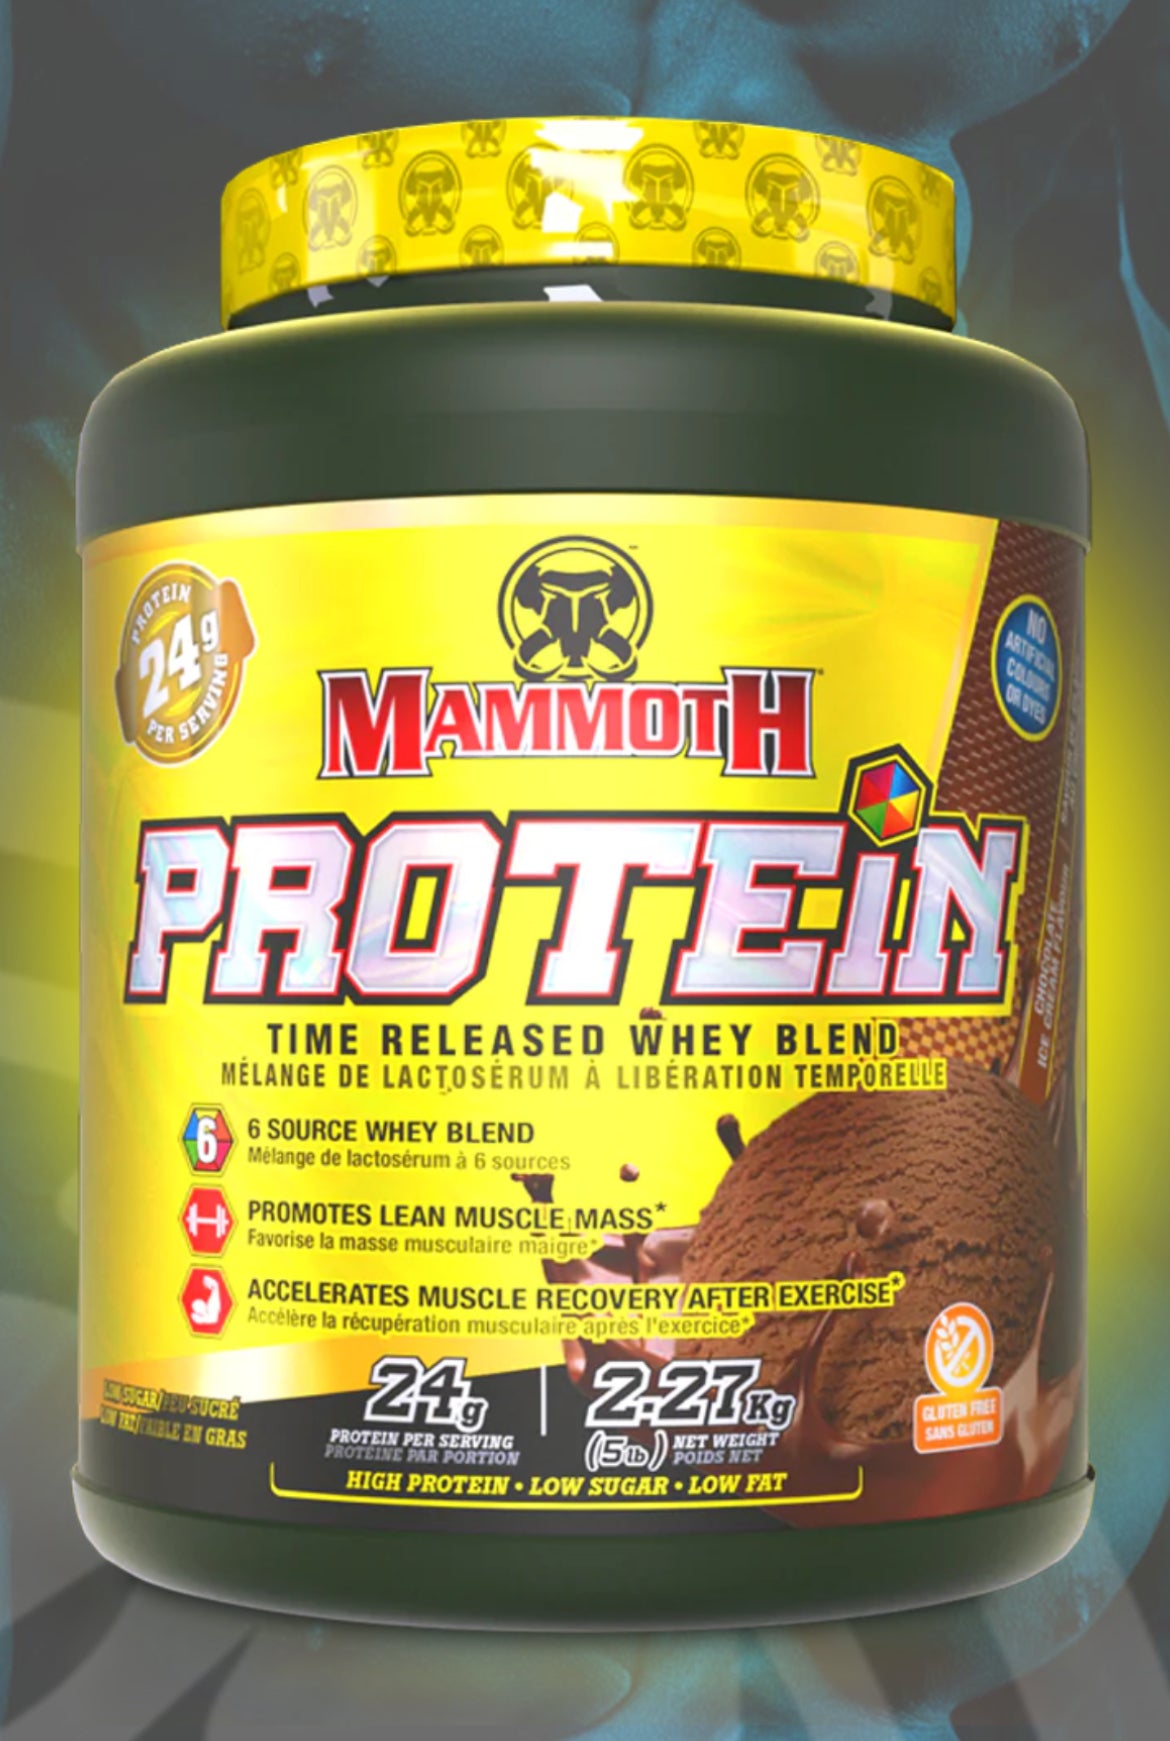 Mammoth Protein 5lbs - Chocolate